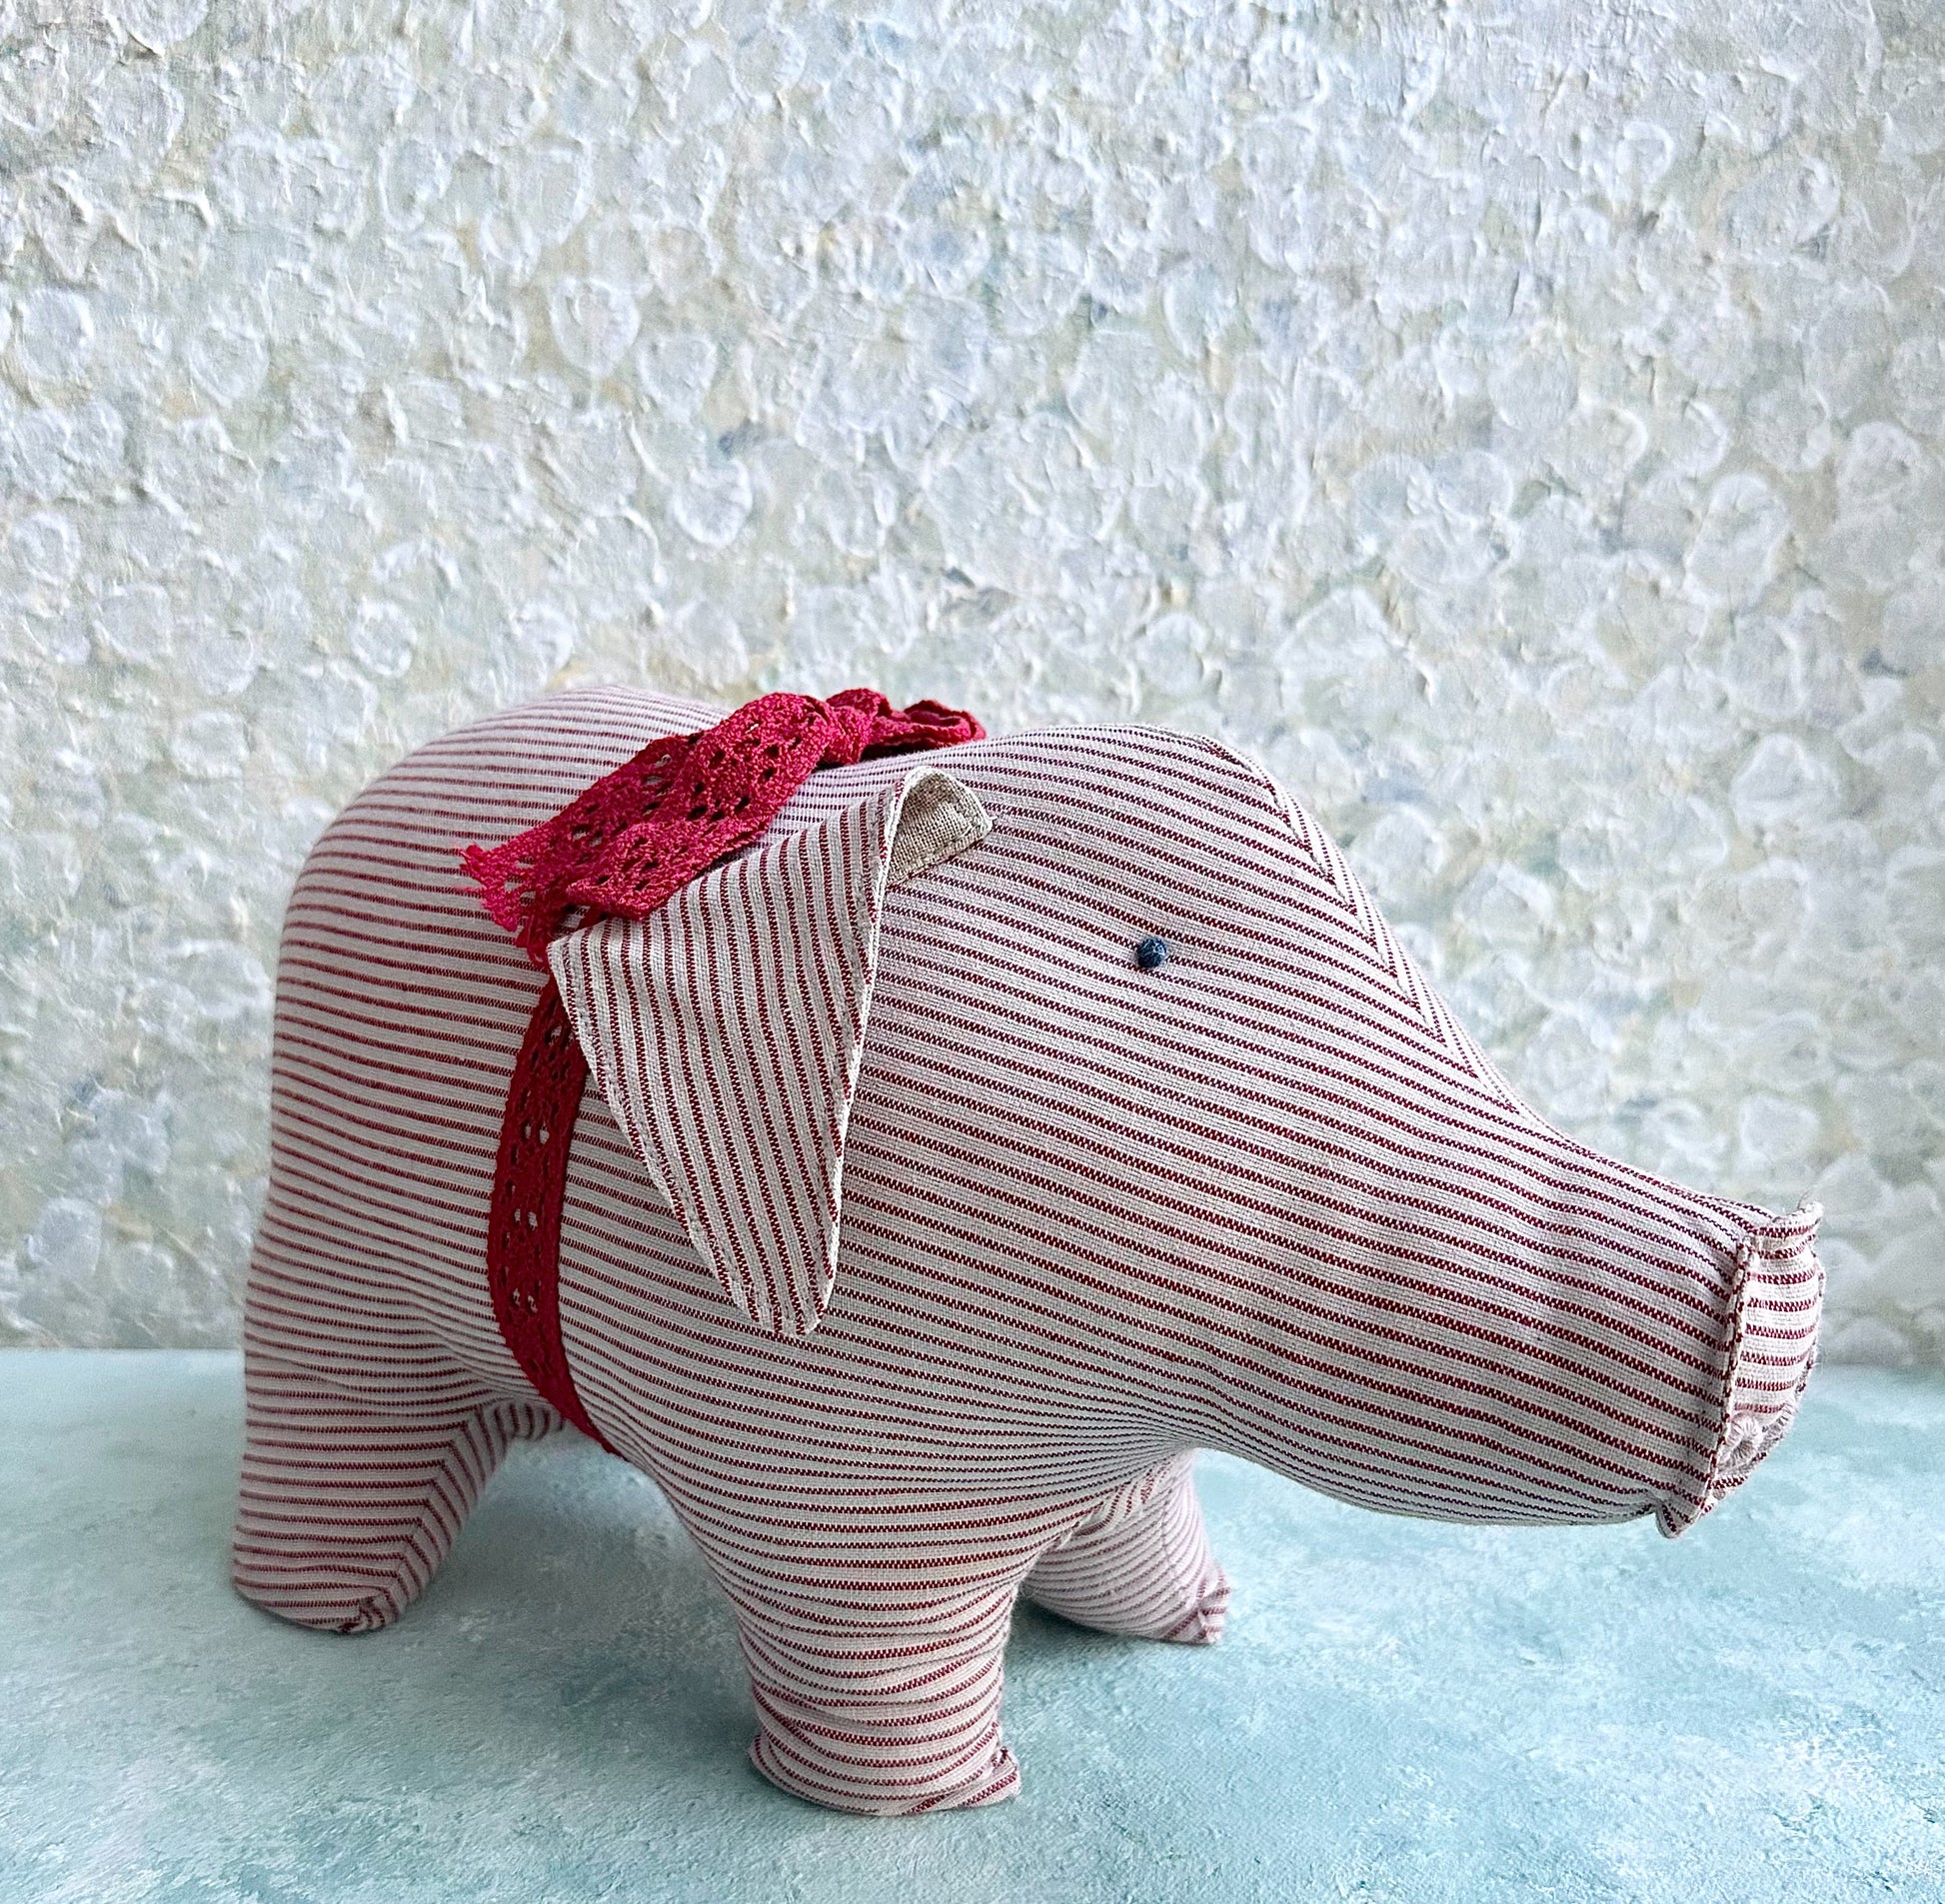 Small Pig - 2009